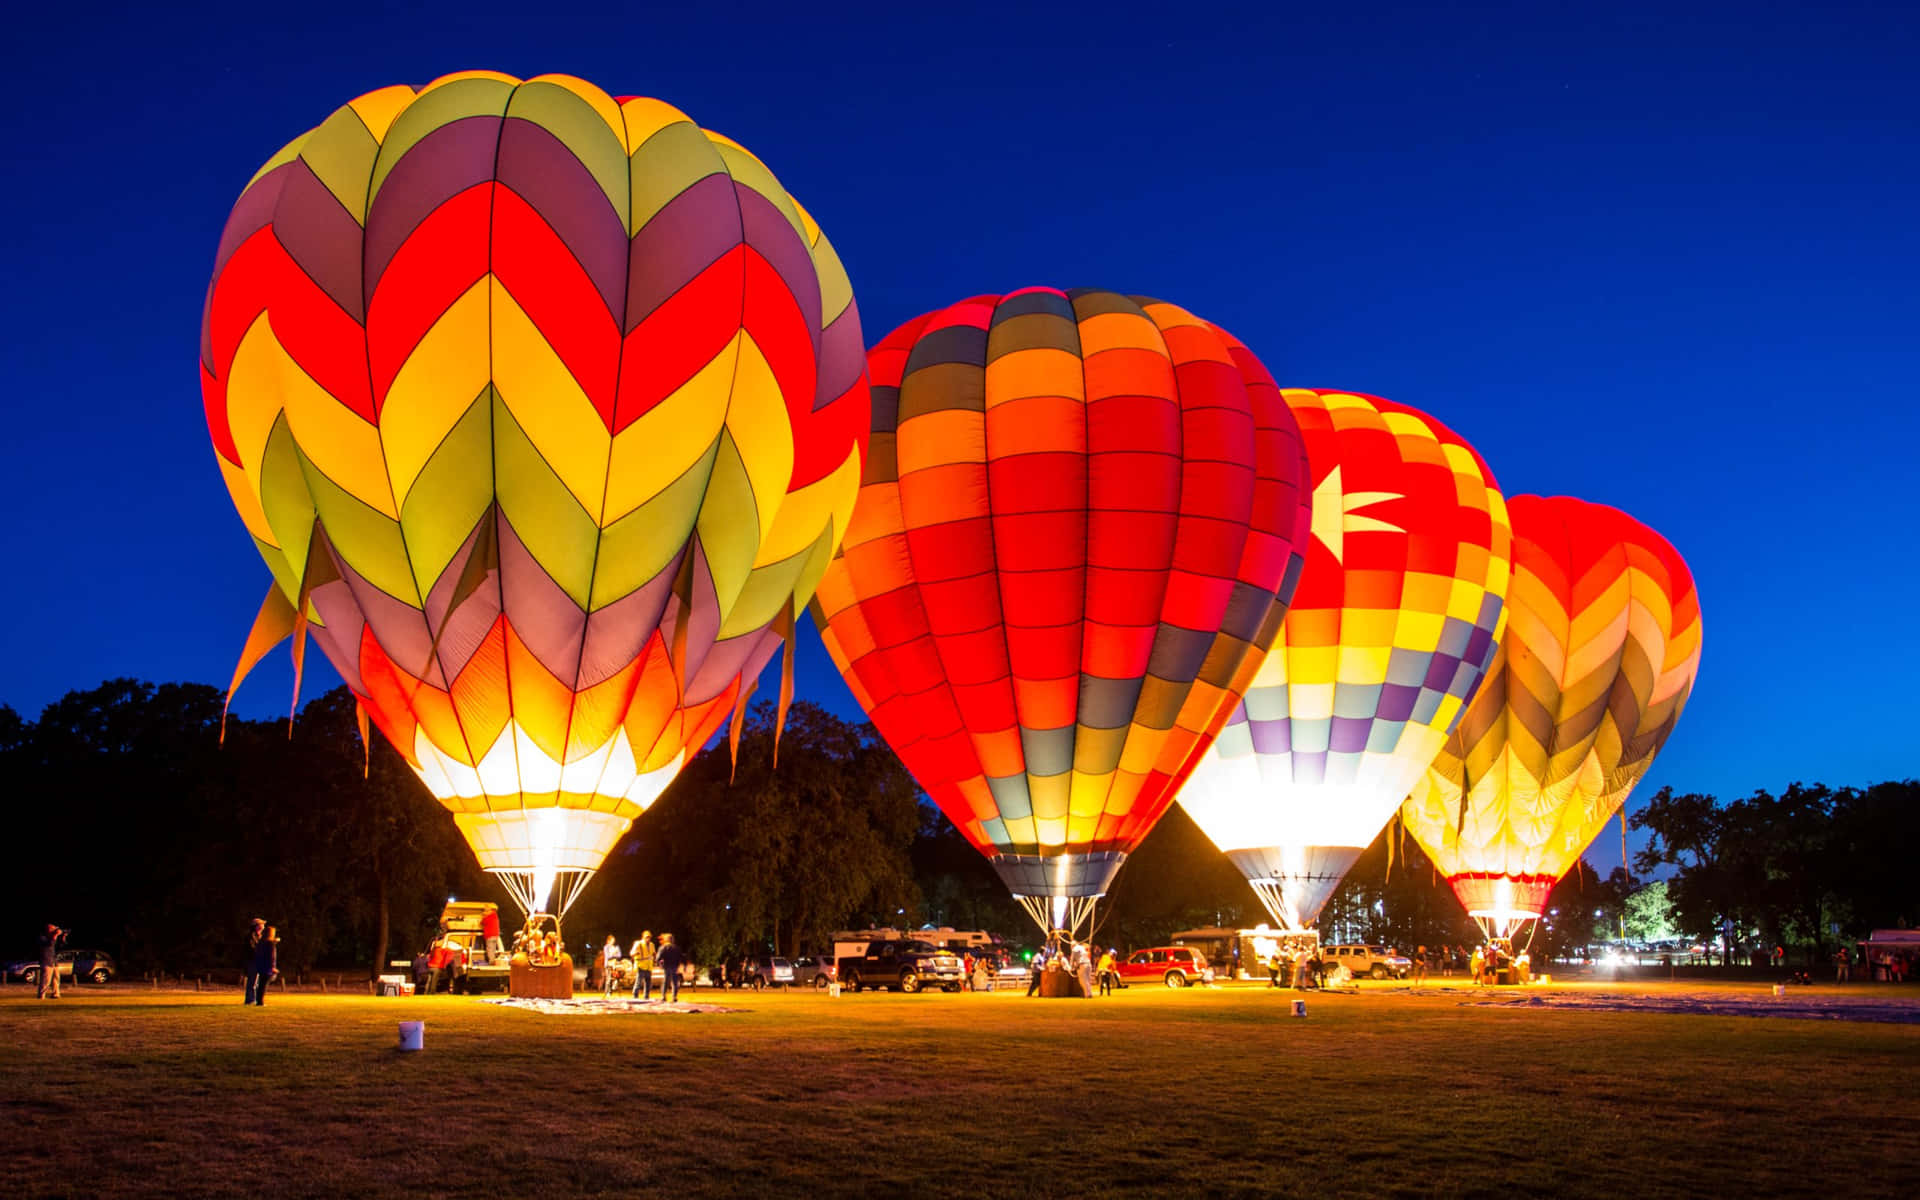 Take off for a beautiful journey in a hot air balloon.